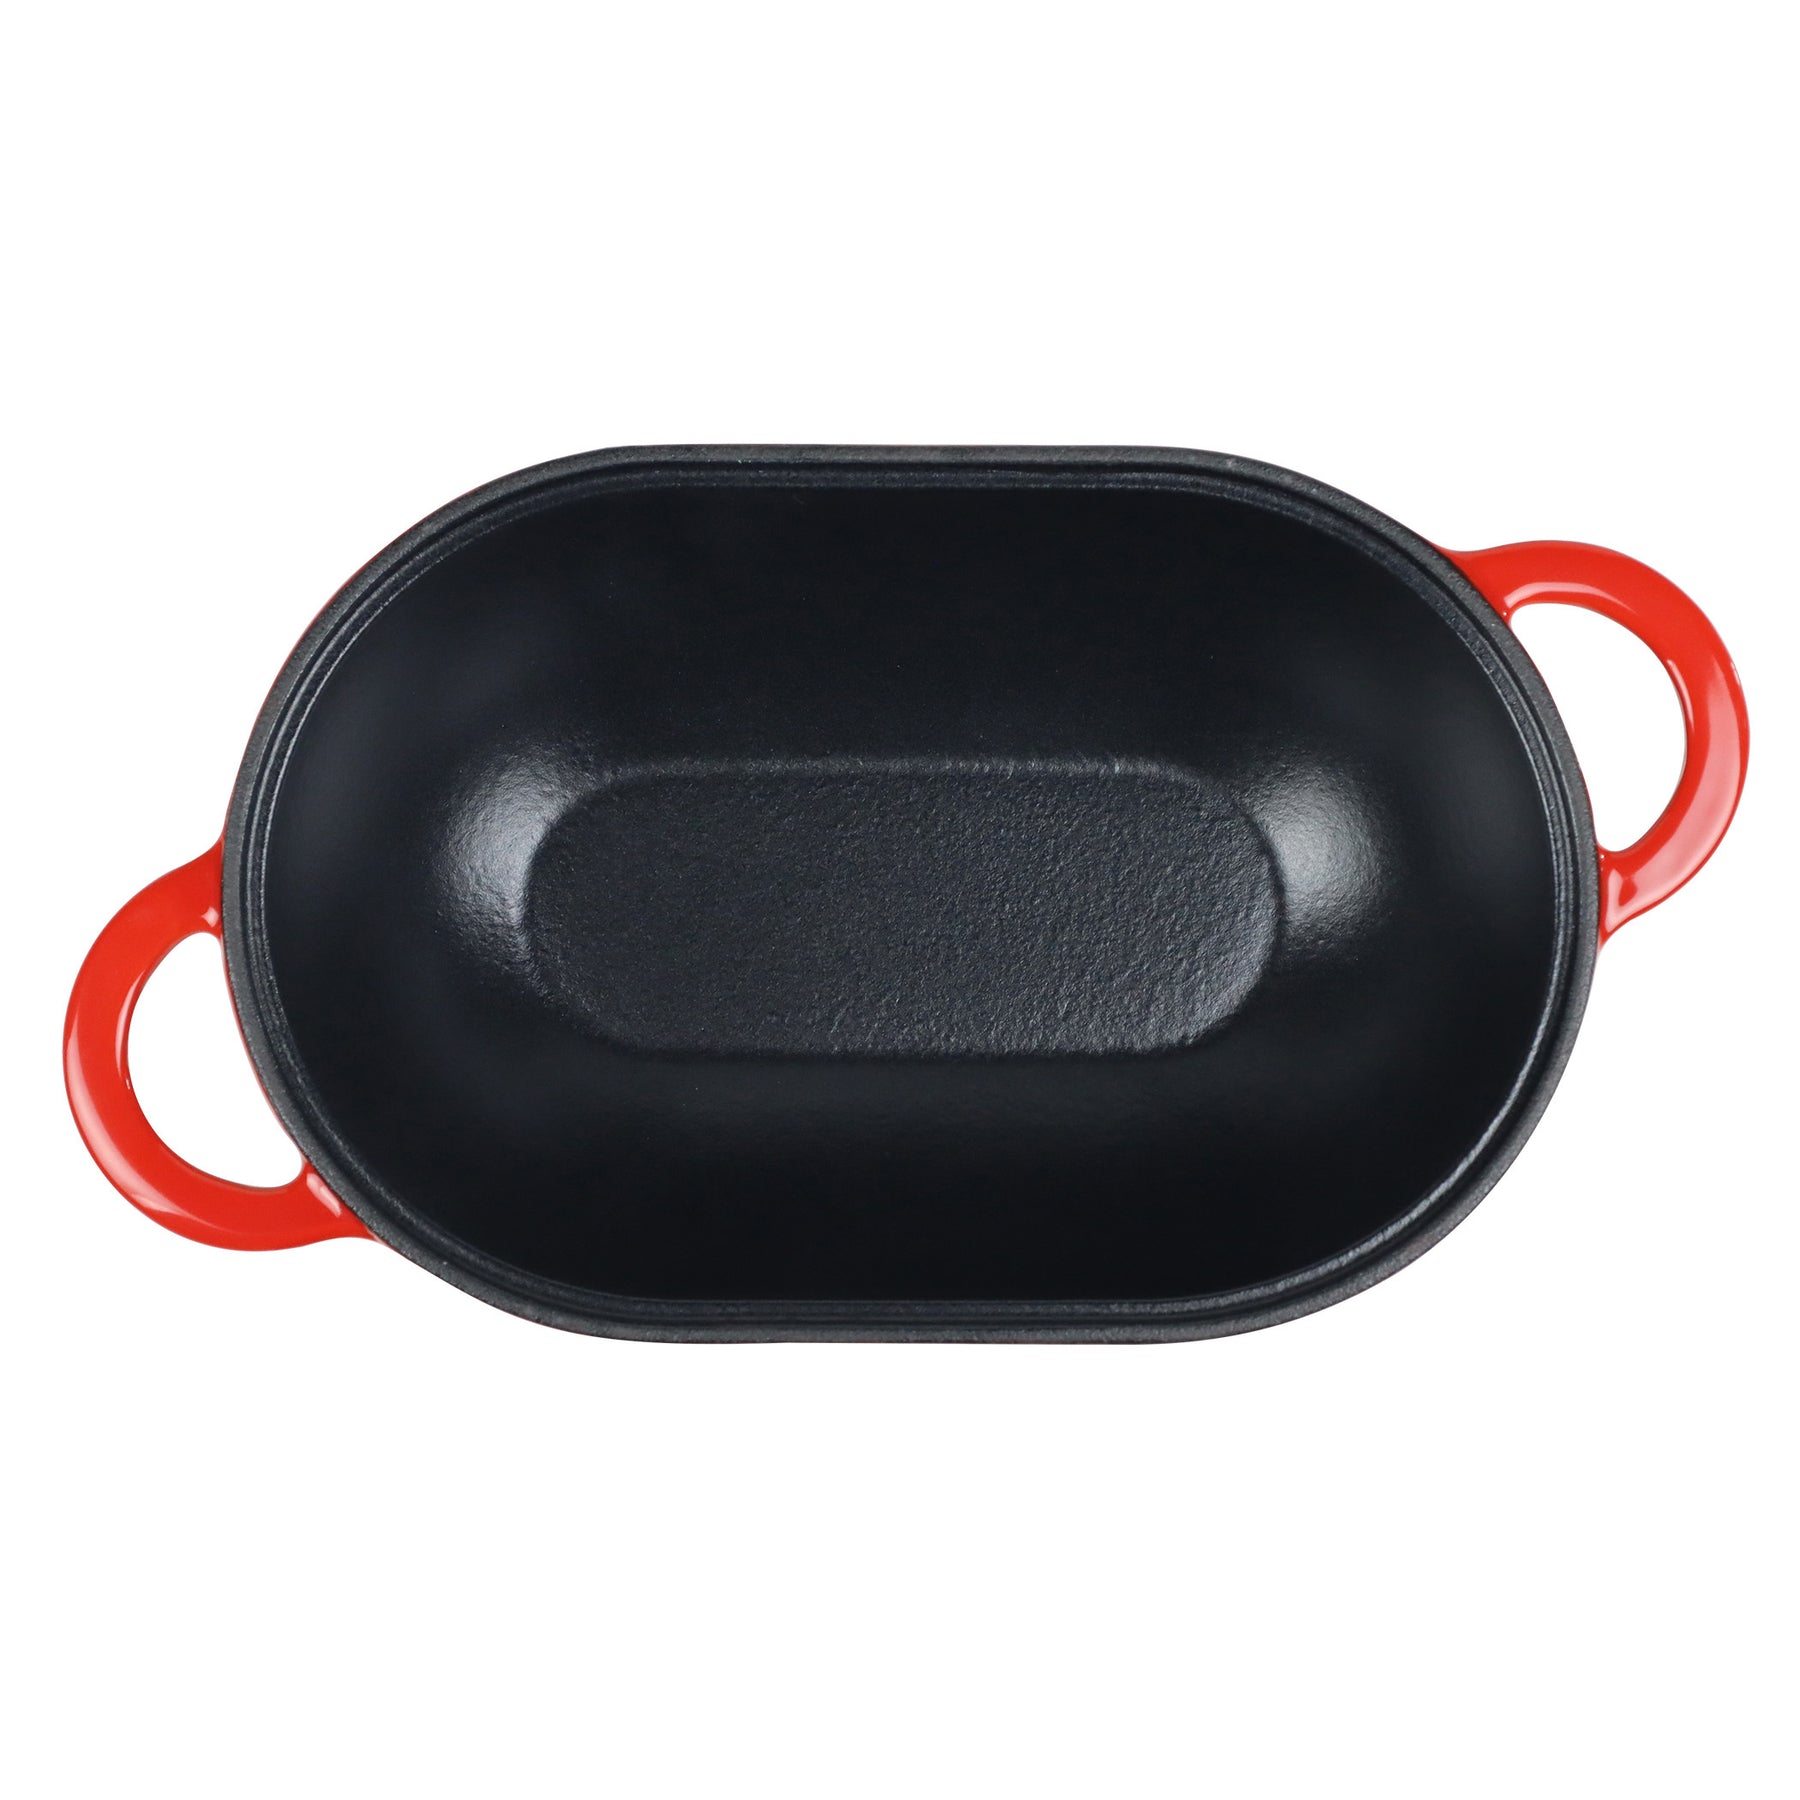 Enameled Cast Iron Bread Pan with Lid 11 inch red Bread Oven Cast Iron  Sourdough Baking Pan Dutch Oven for Bread Cookware - AliExpress